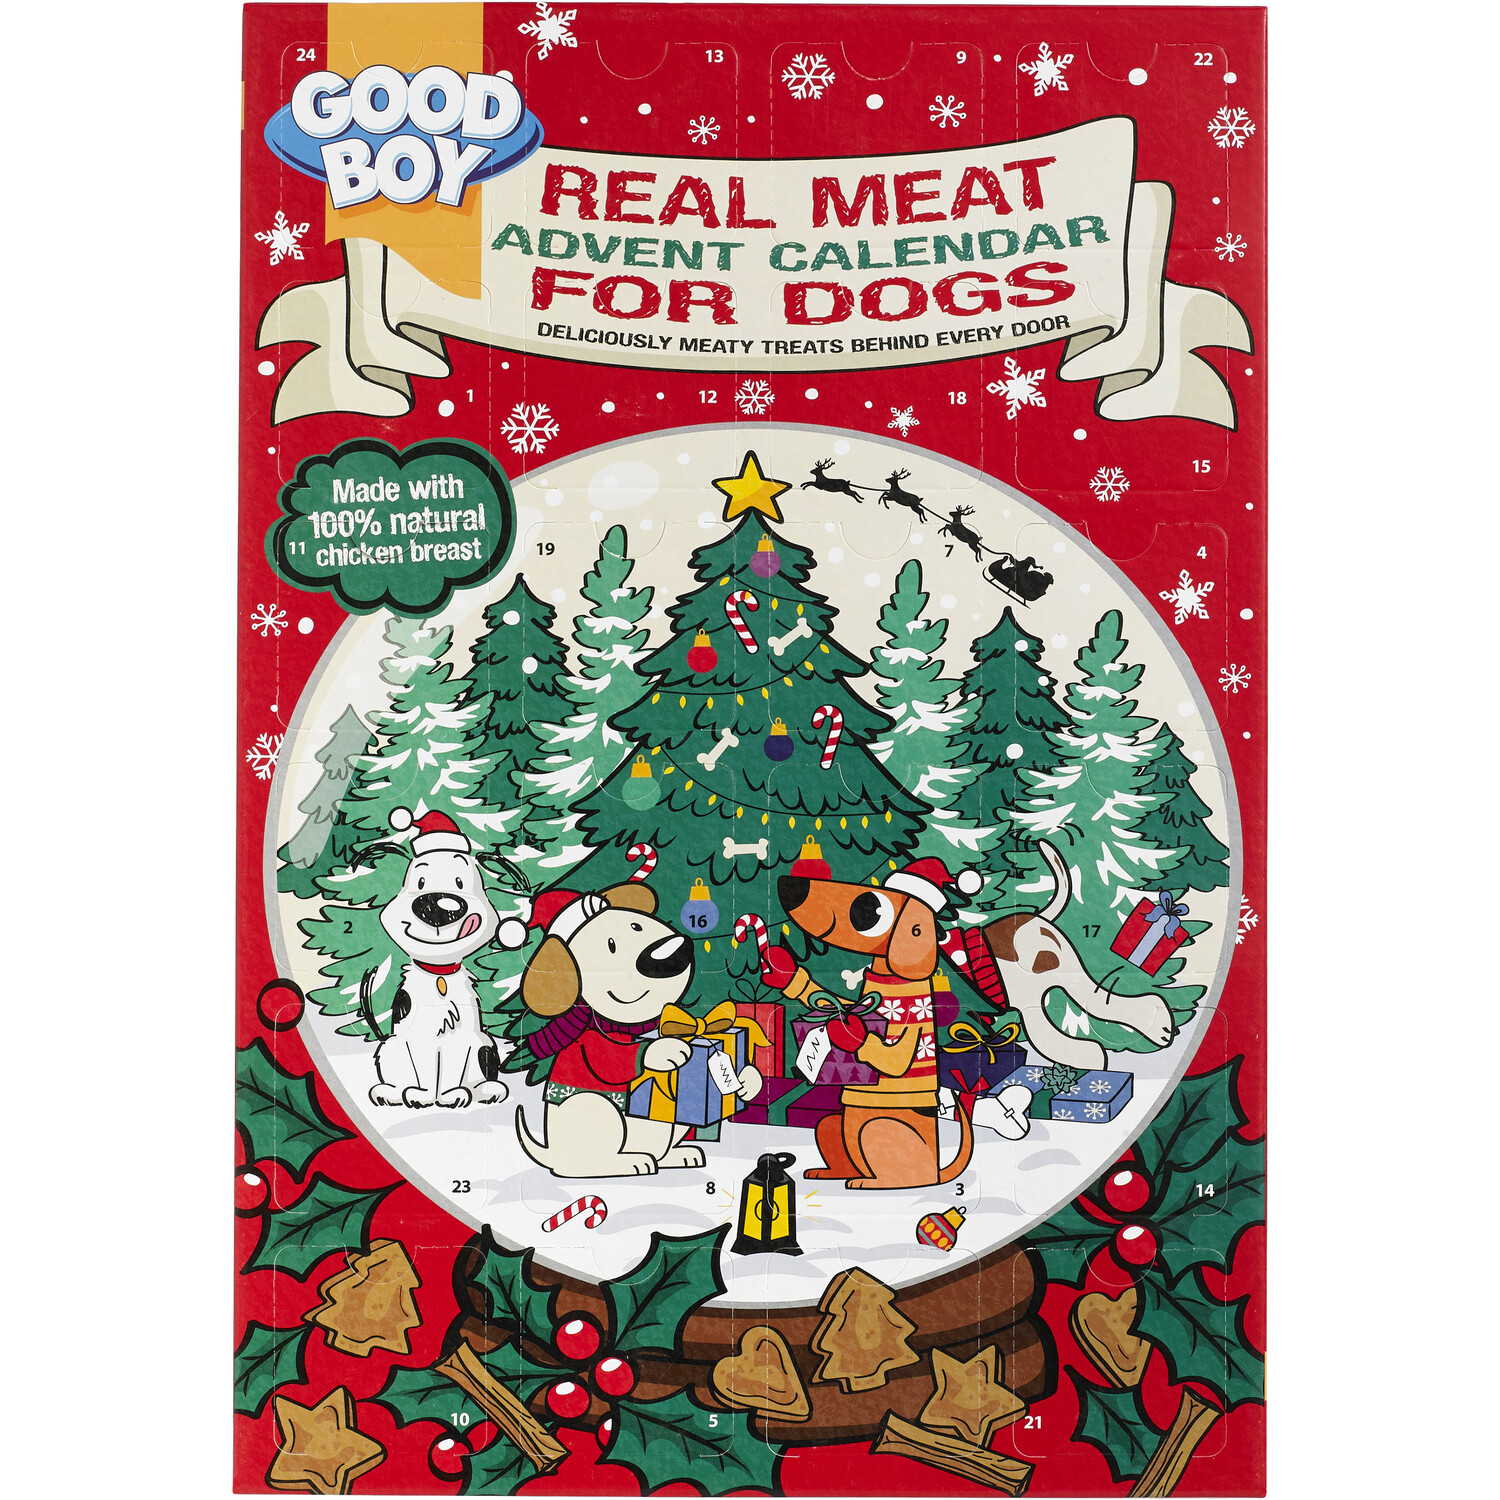 Good Boy Real Meat Red Advent Calendar for Dogs Image